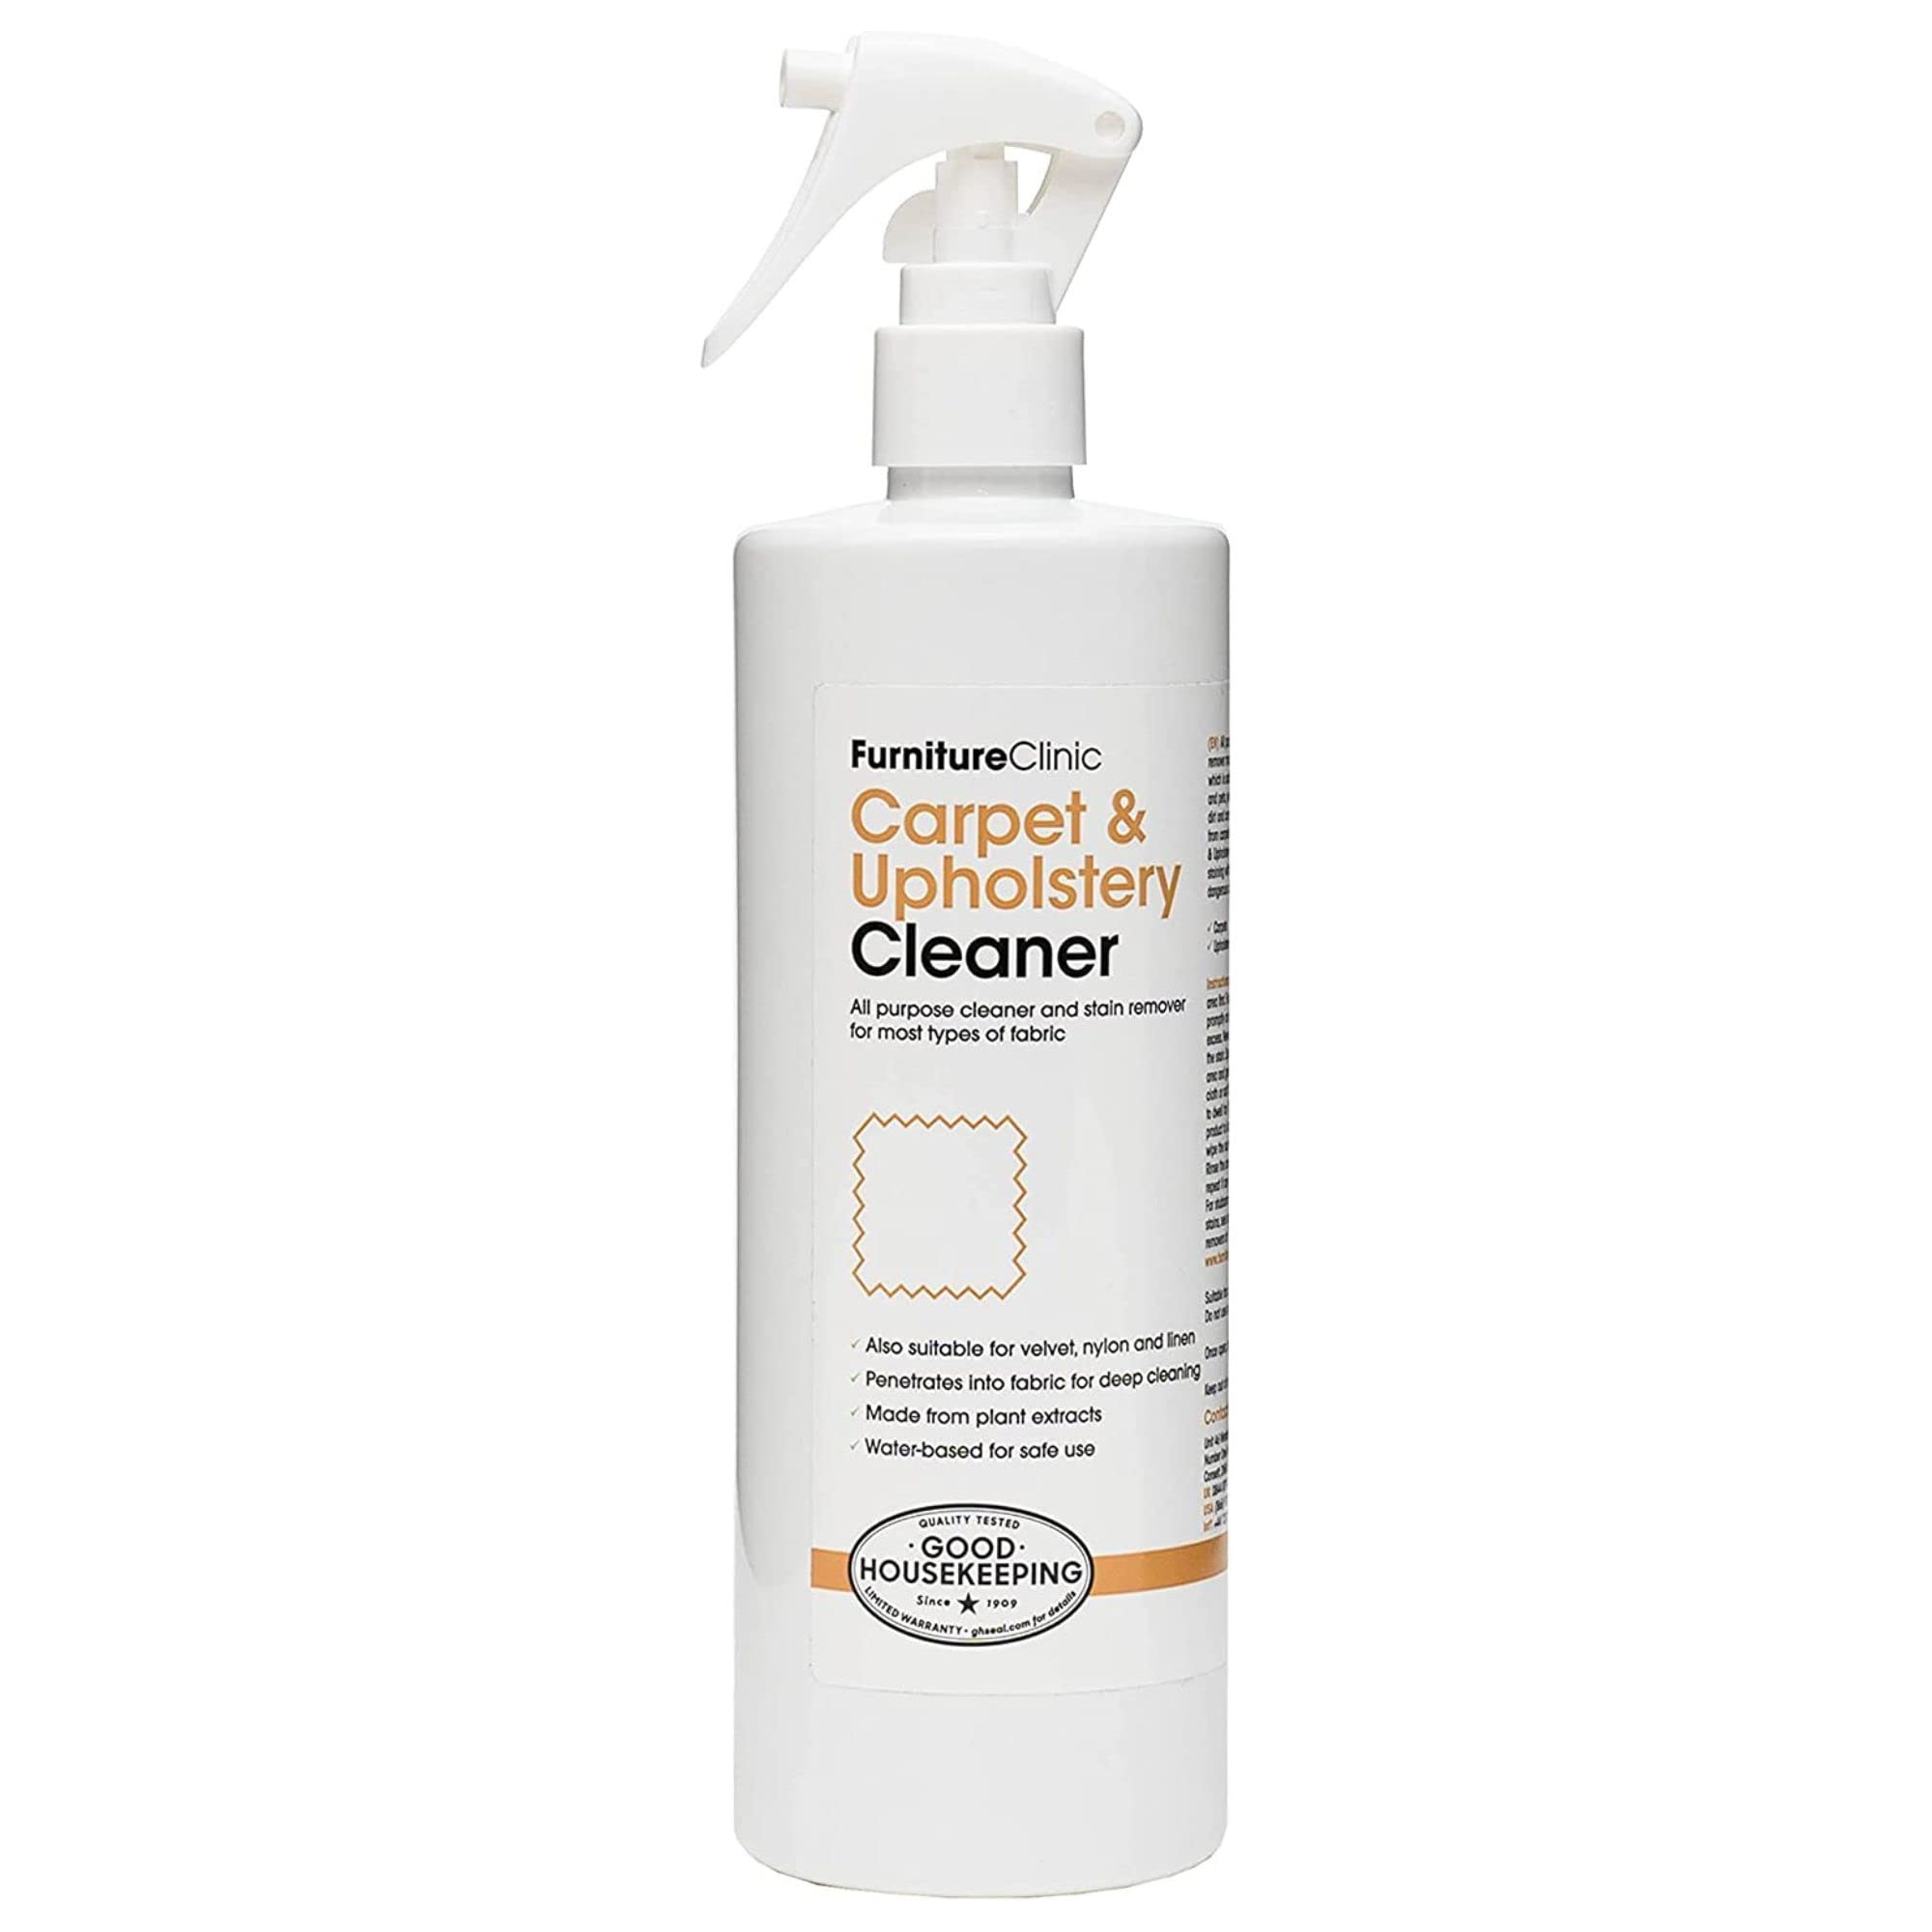 Furniture Clinic Carpet & Upholstery Cleaner Spray